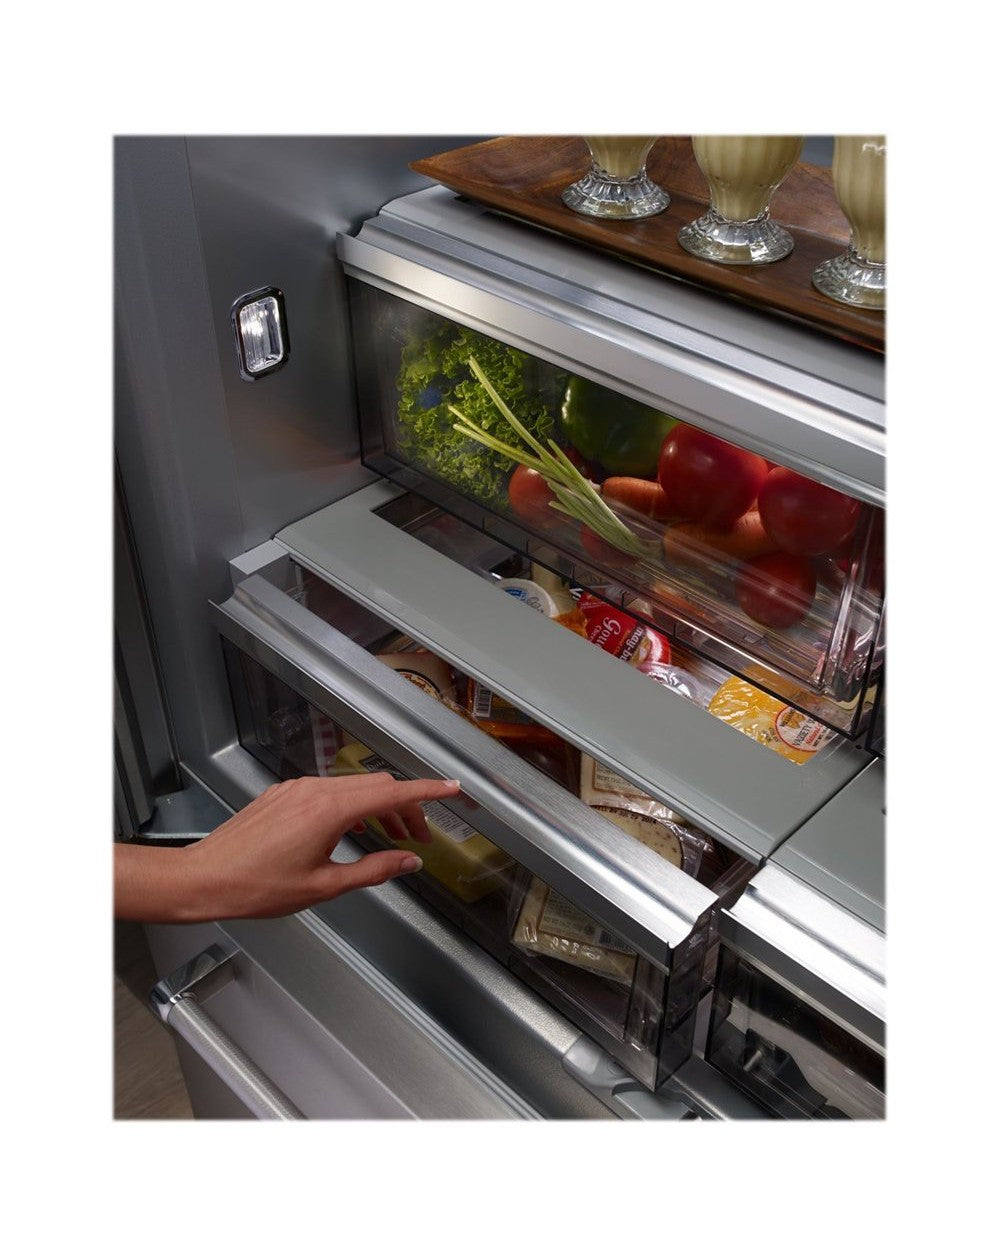 KITCHENAID KBFN502ESS 42&quot; Width Built-In Stainless French Door Refrigerator